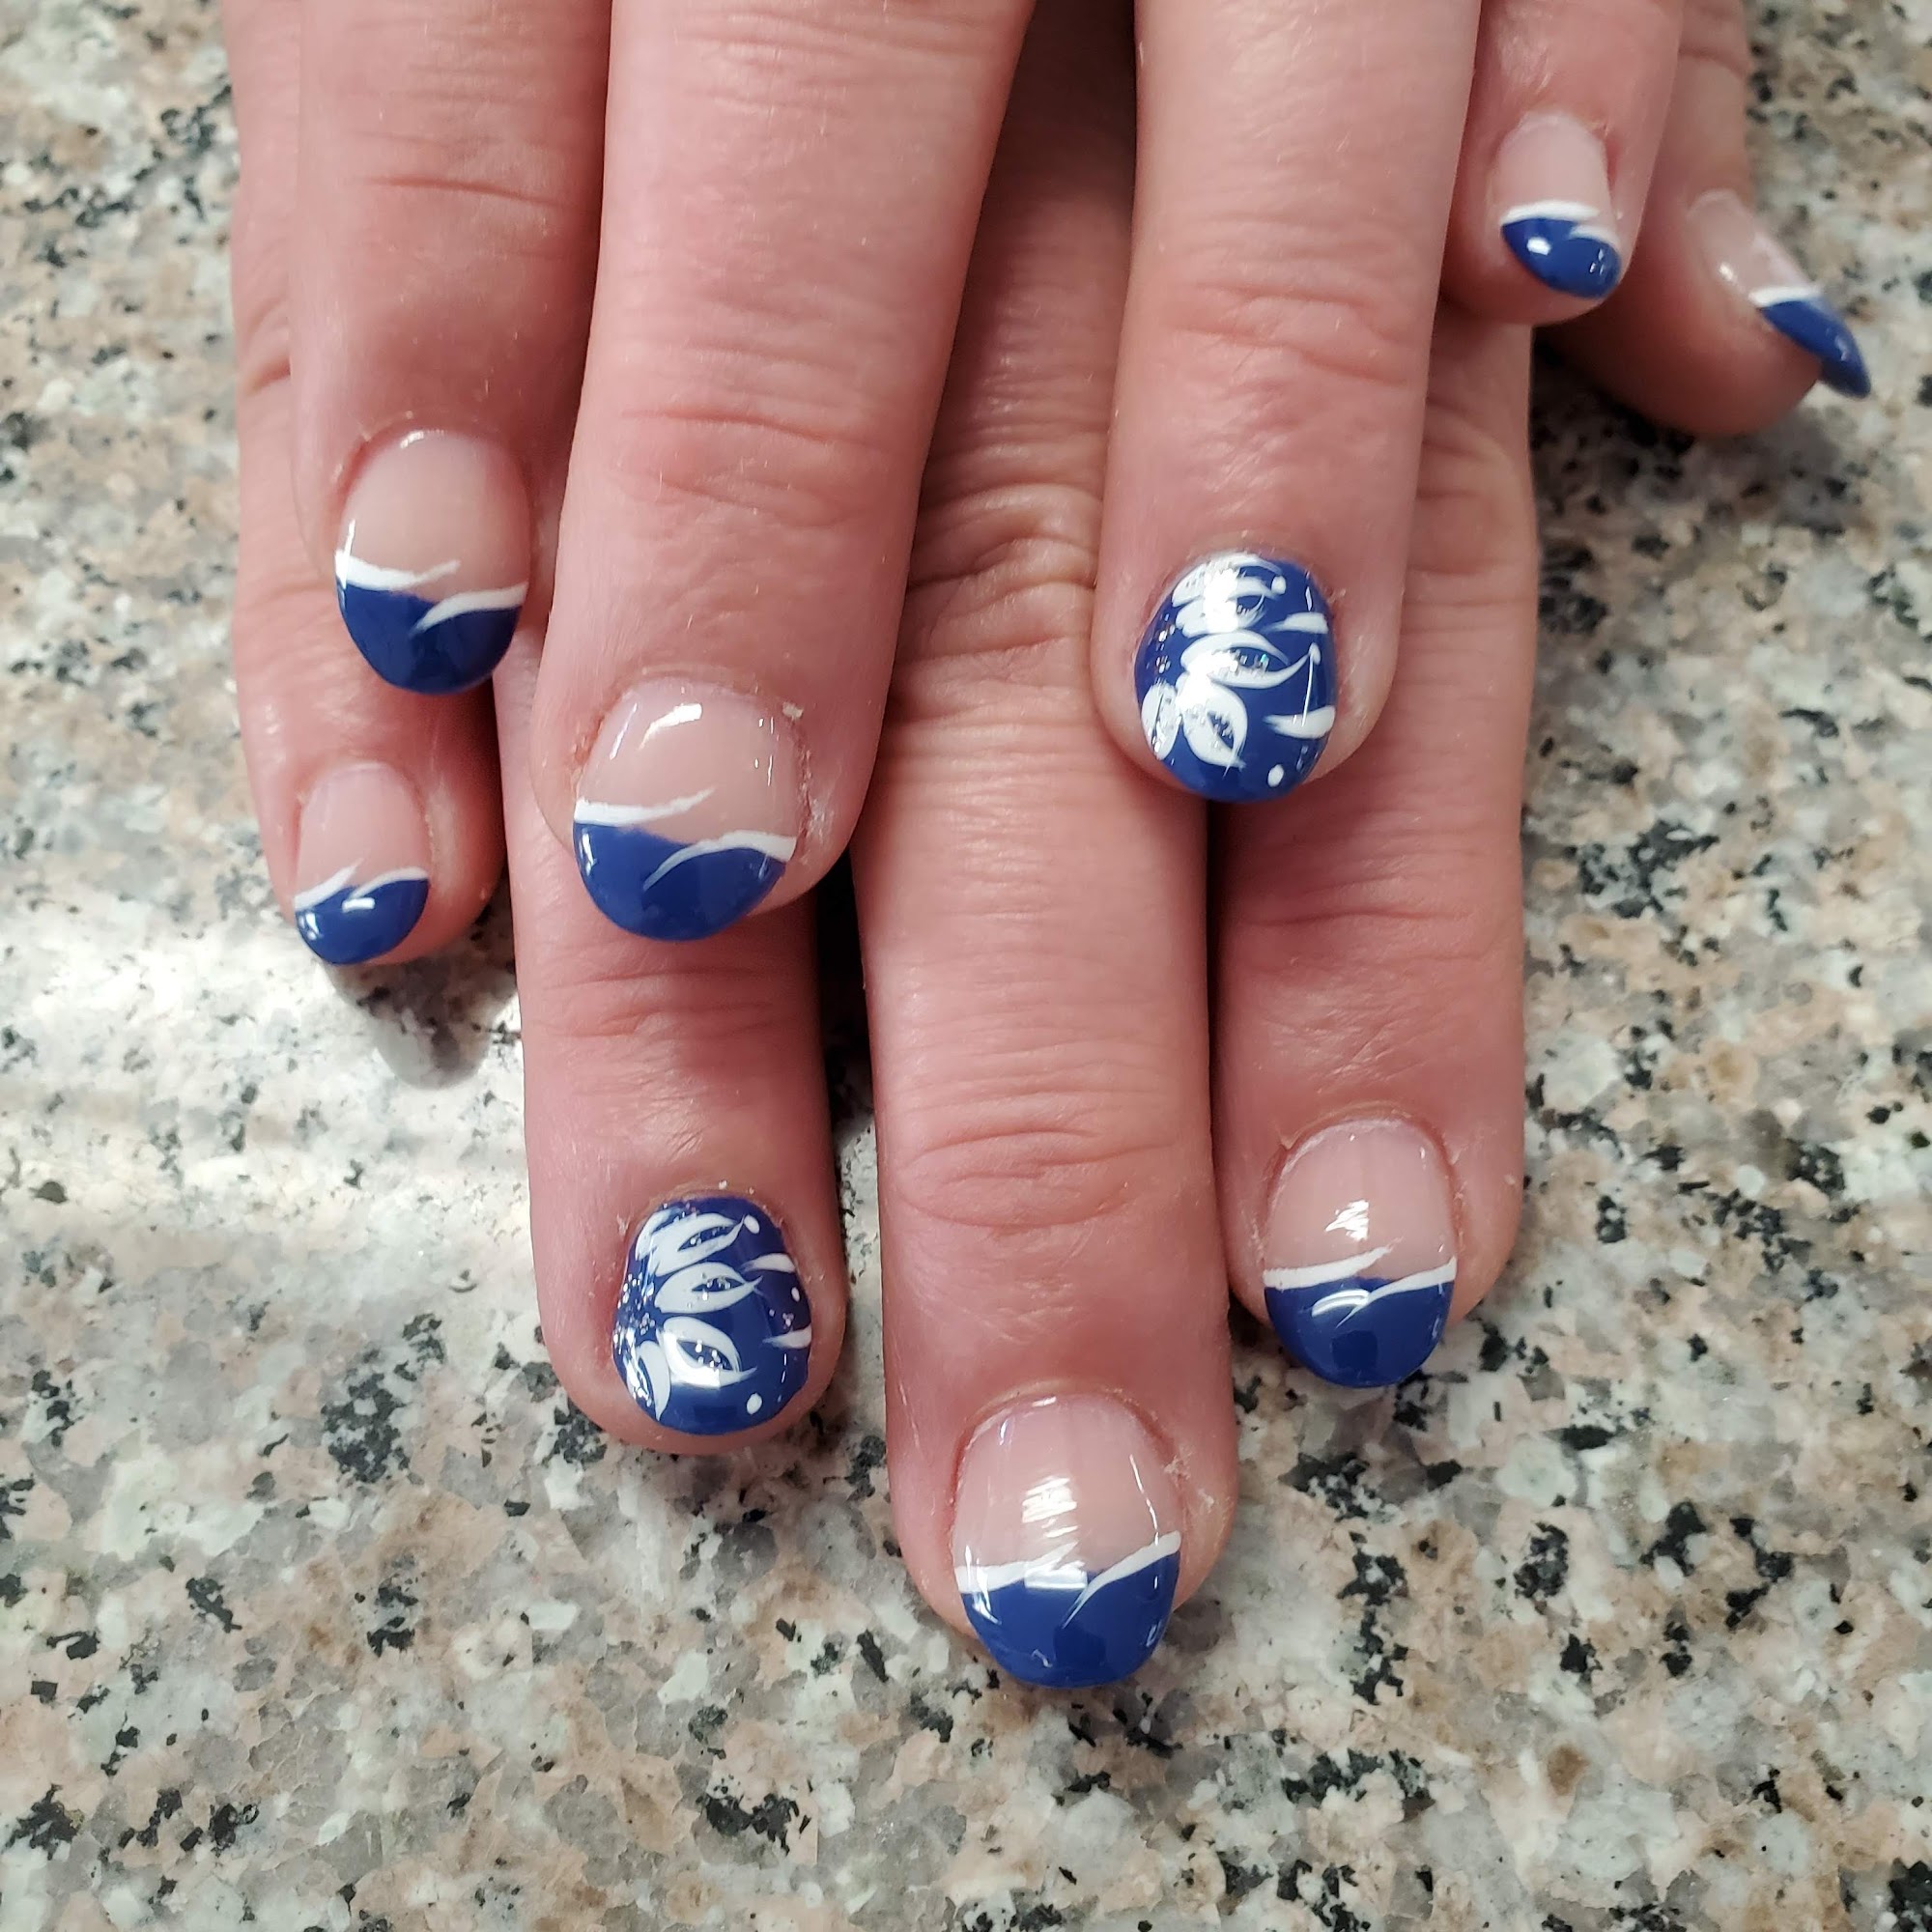 Stunning Nail Spa 56 Federal St, St Albans City Vermont 05478